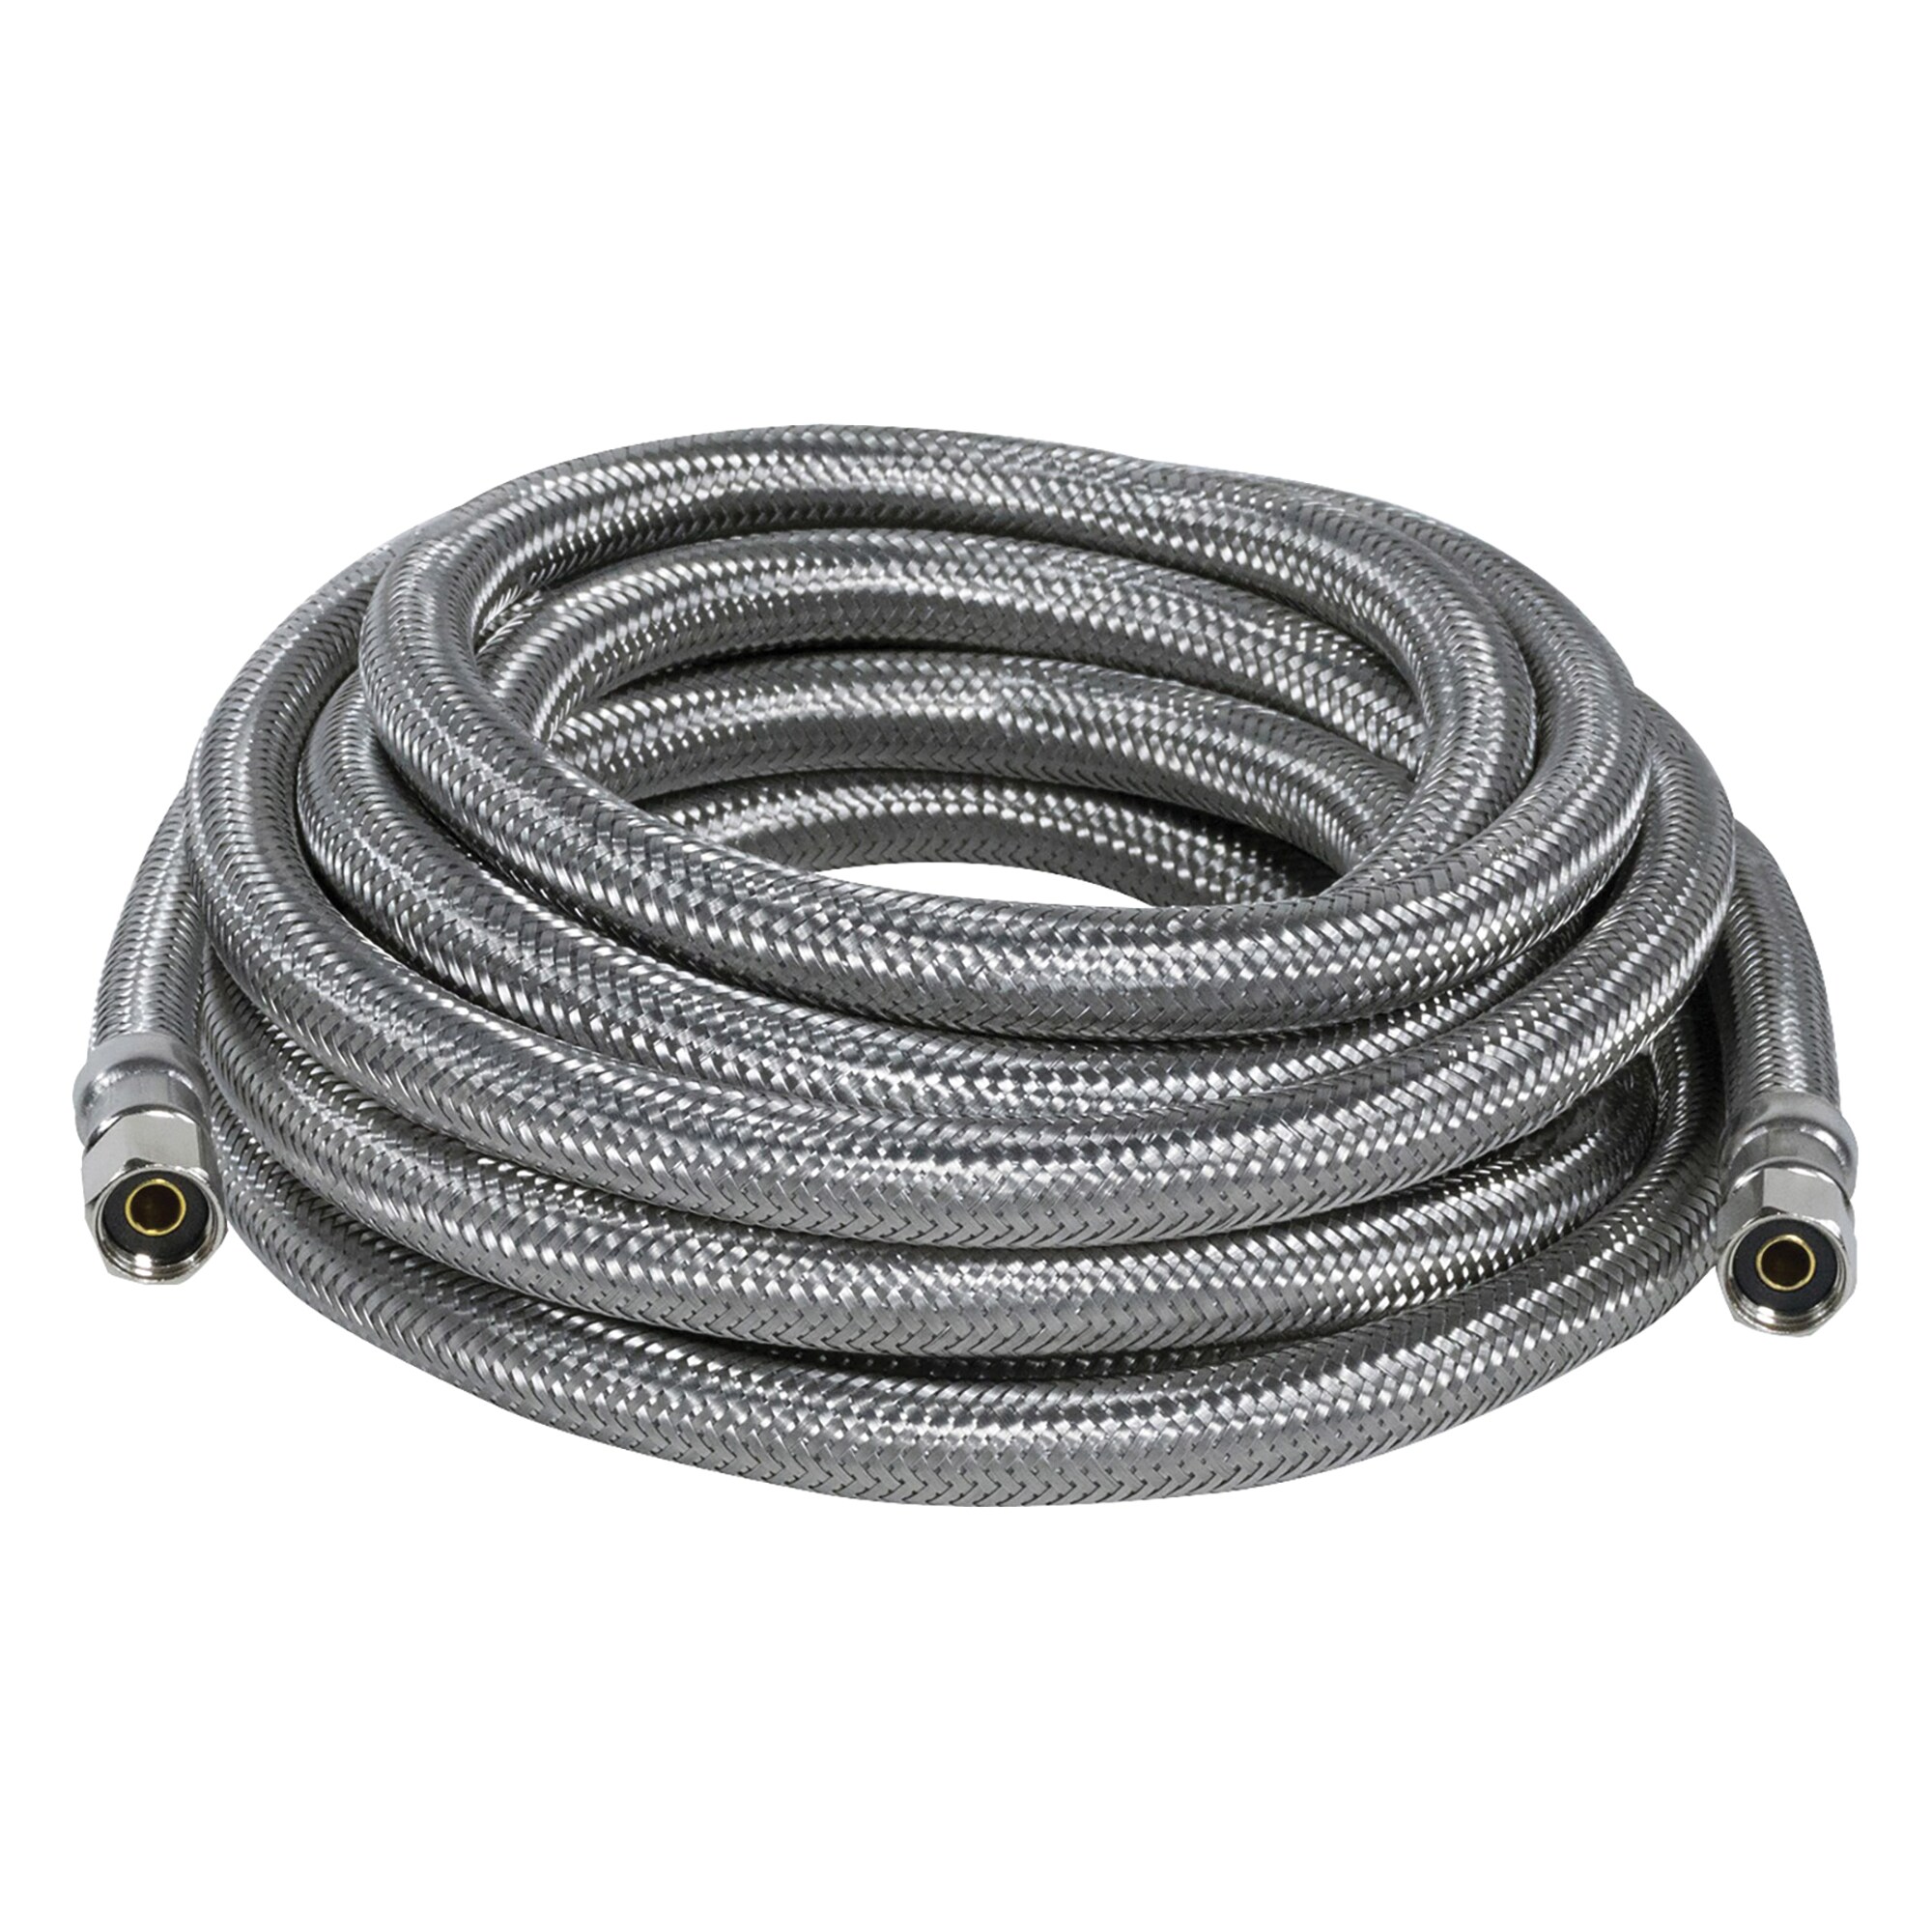 PEX Refrigerator Water Line - 15FT Ice Maker Tubing with 1/4 Compression  Fittings，Flexible Hose For Potable Drinking Water